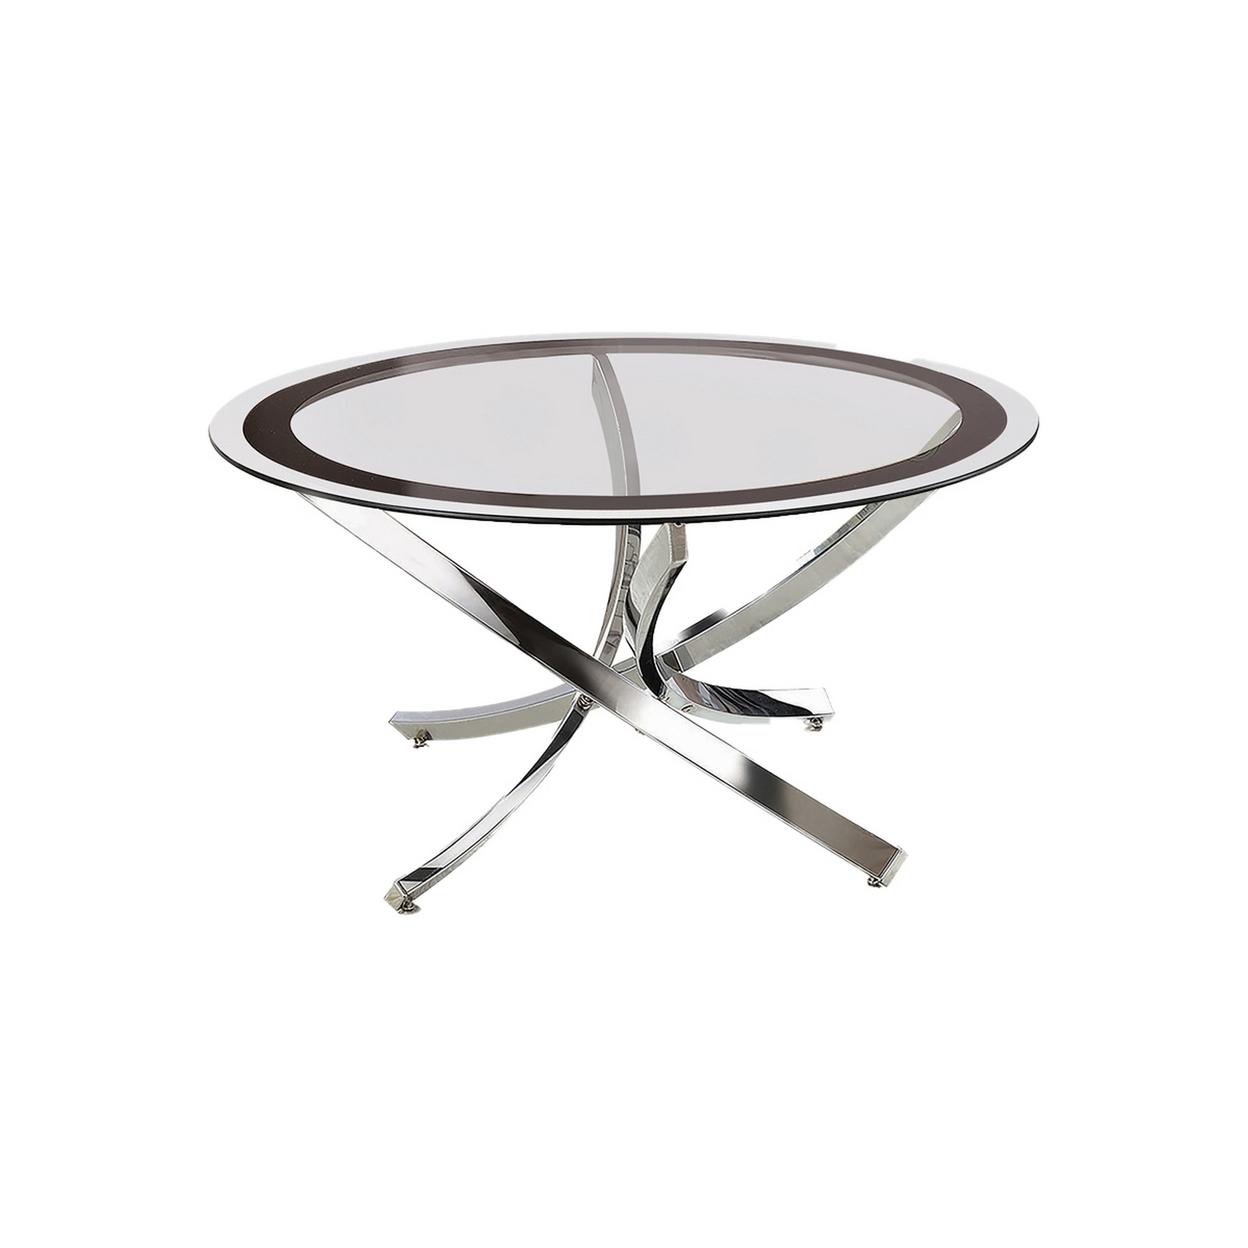 Round Tempered Glass Top Coffee Table With Metal Legs, Silver And Clear- Saltoro Sherpi